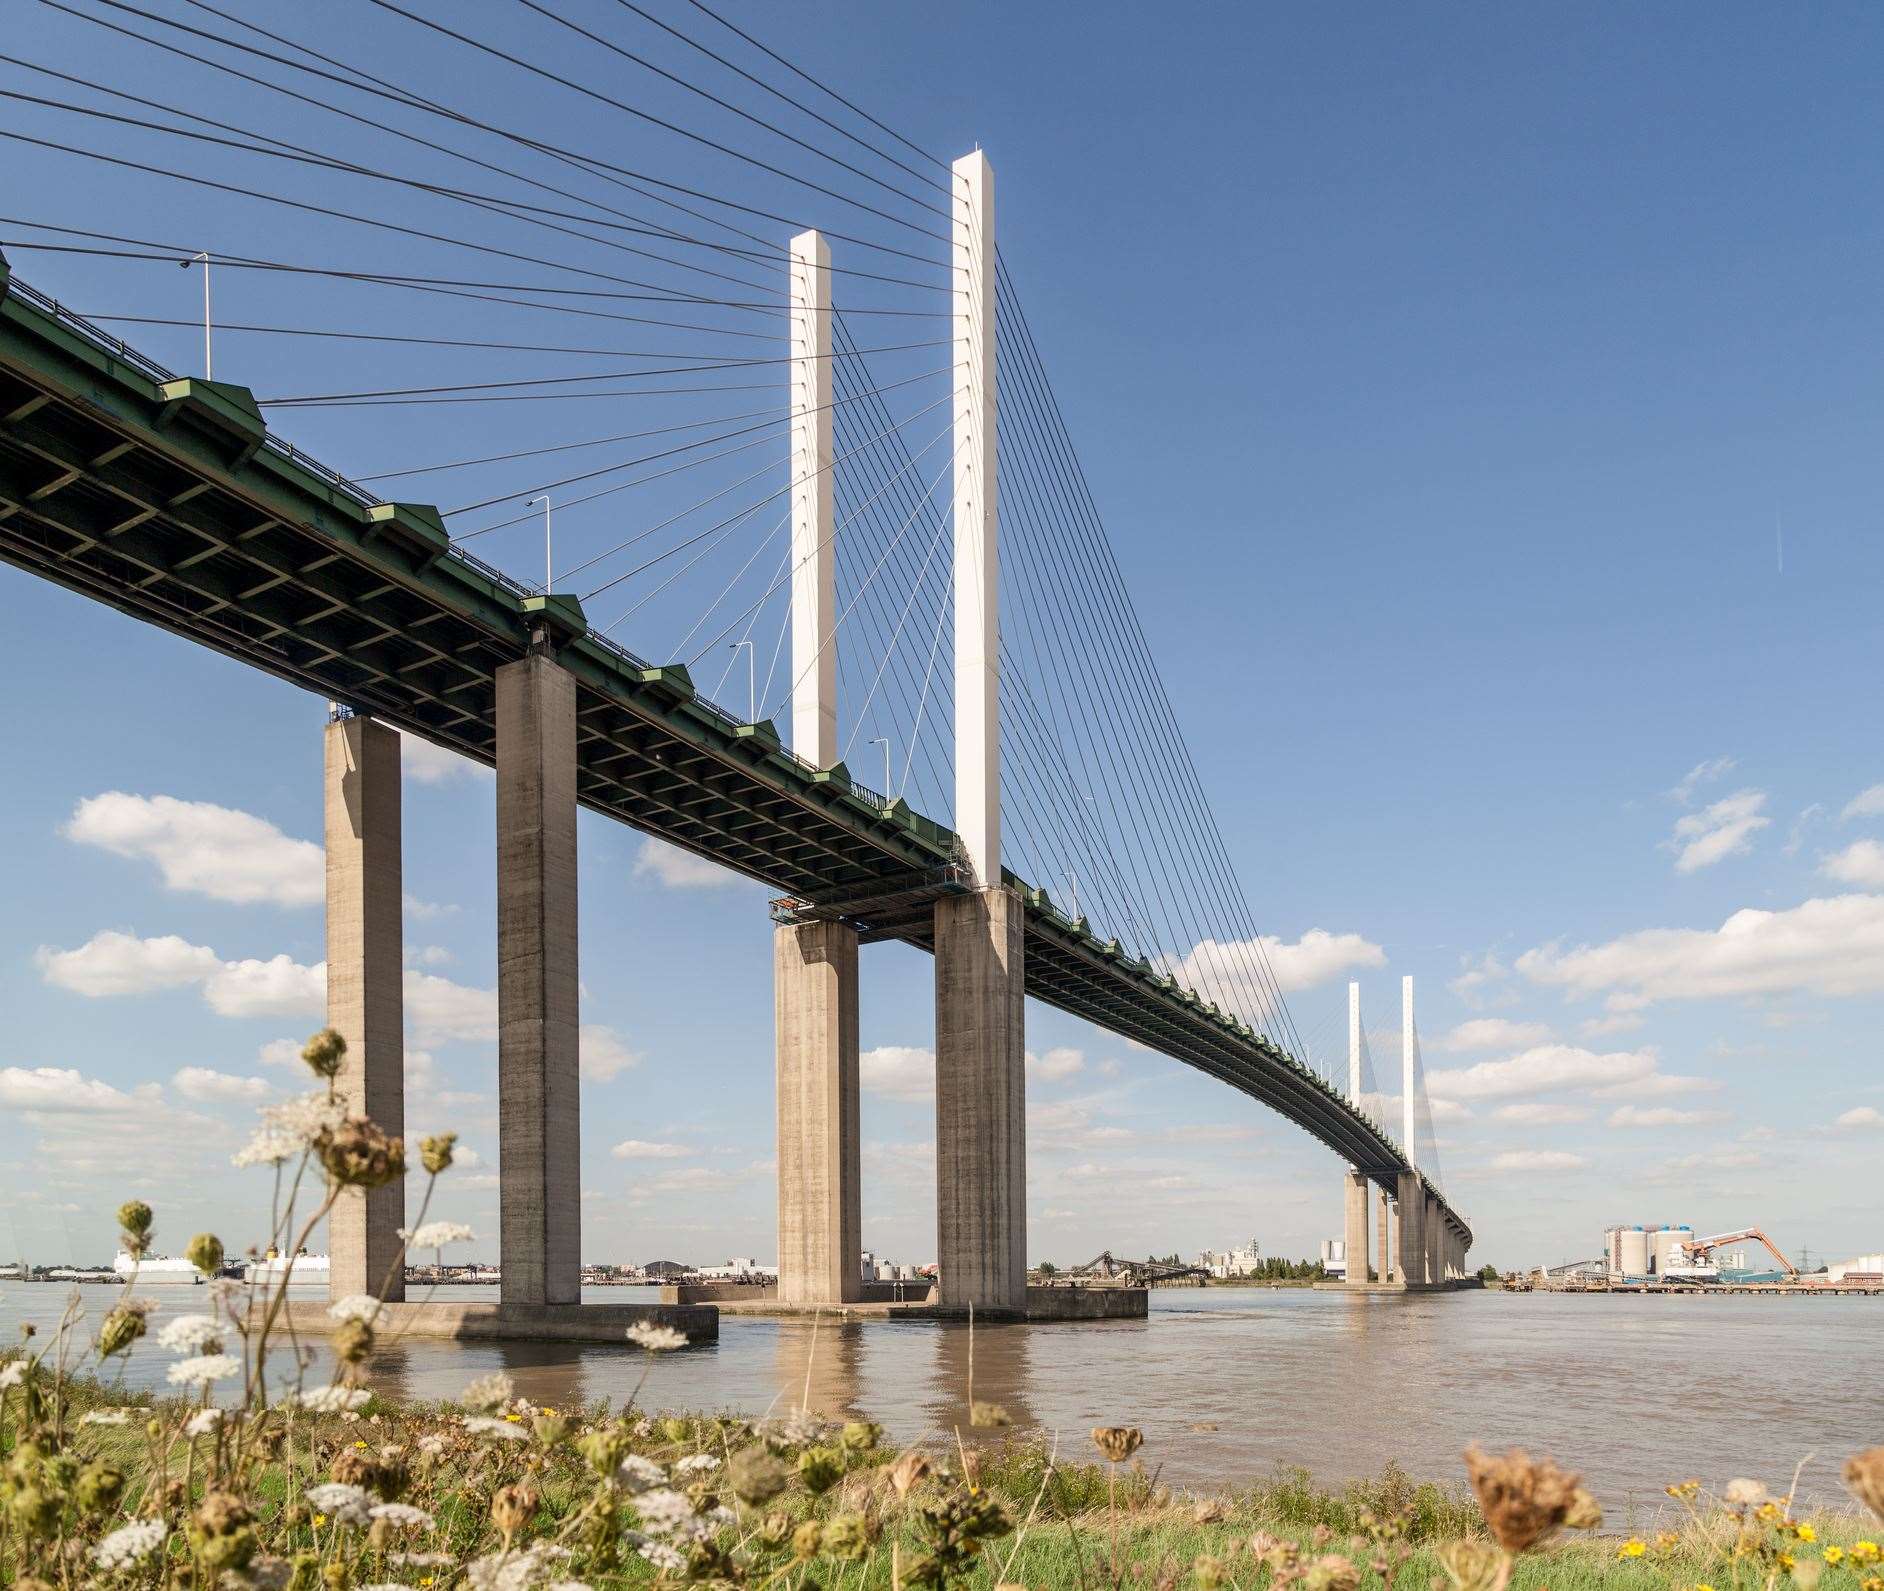 The Dartford Crossing is already operating over capacity